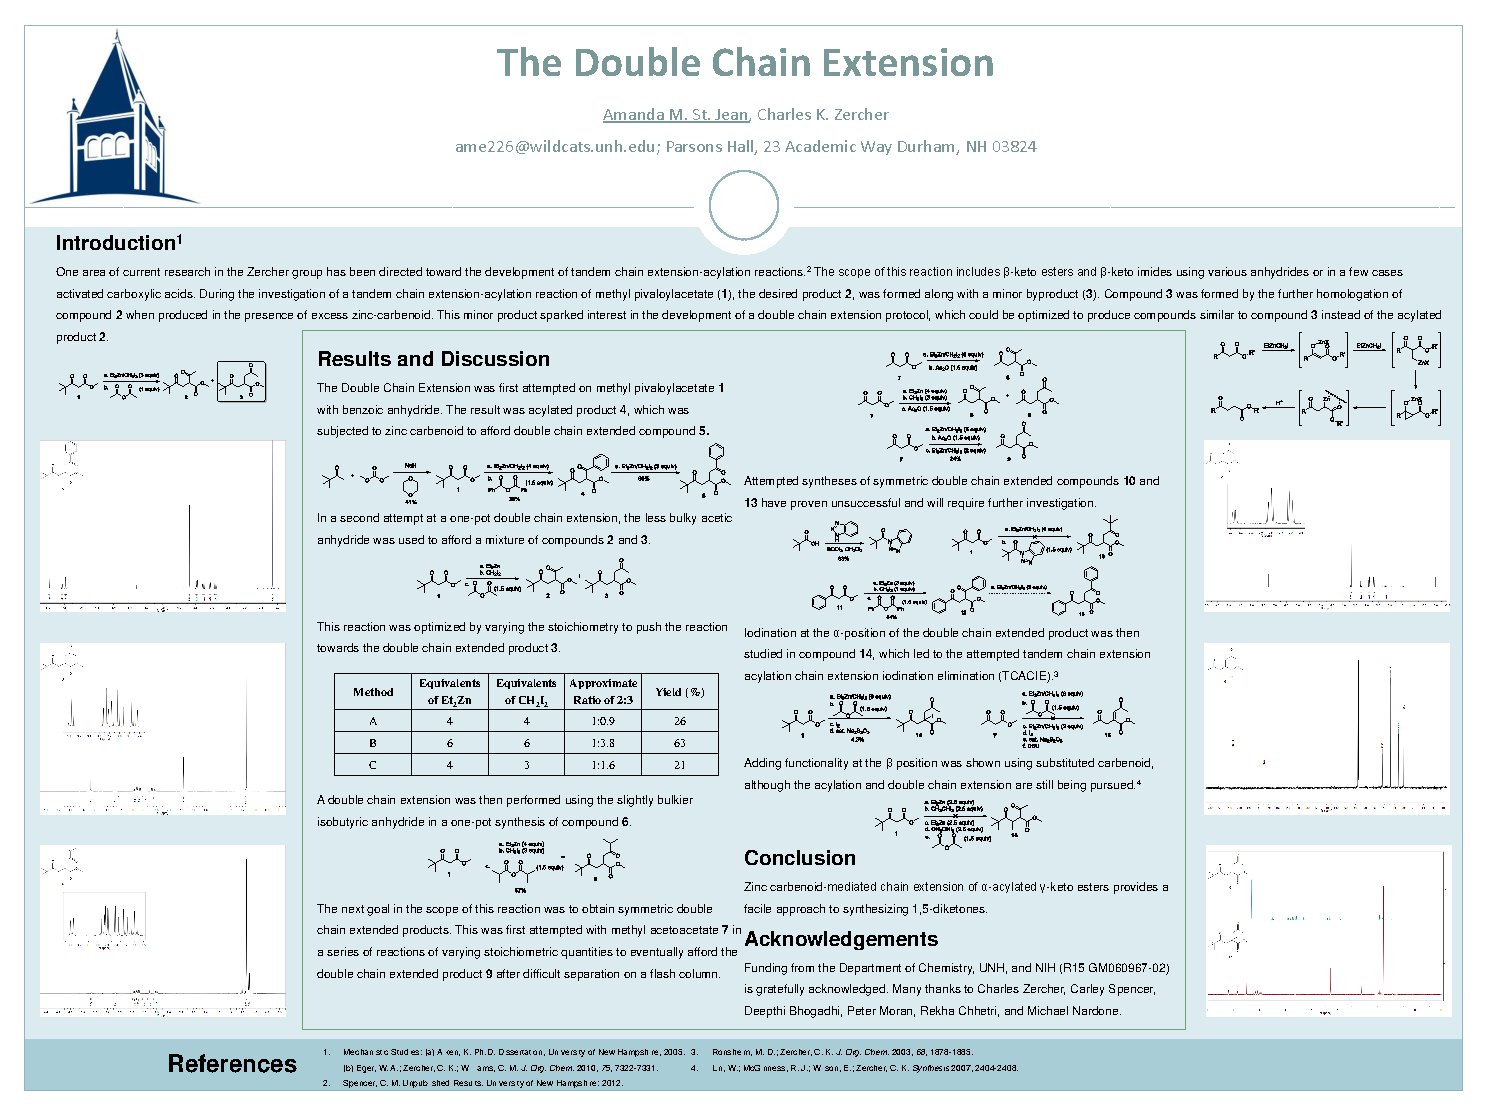 The Double Chain Extension by ame226